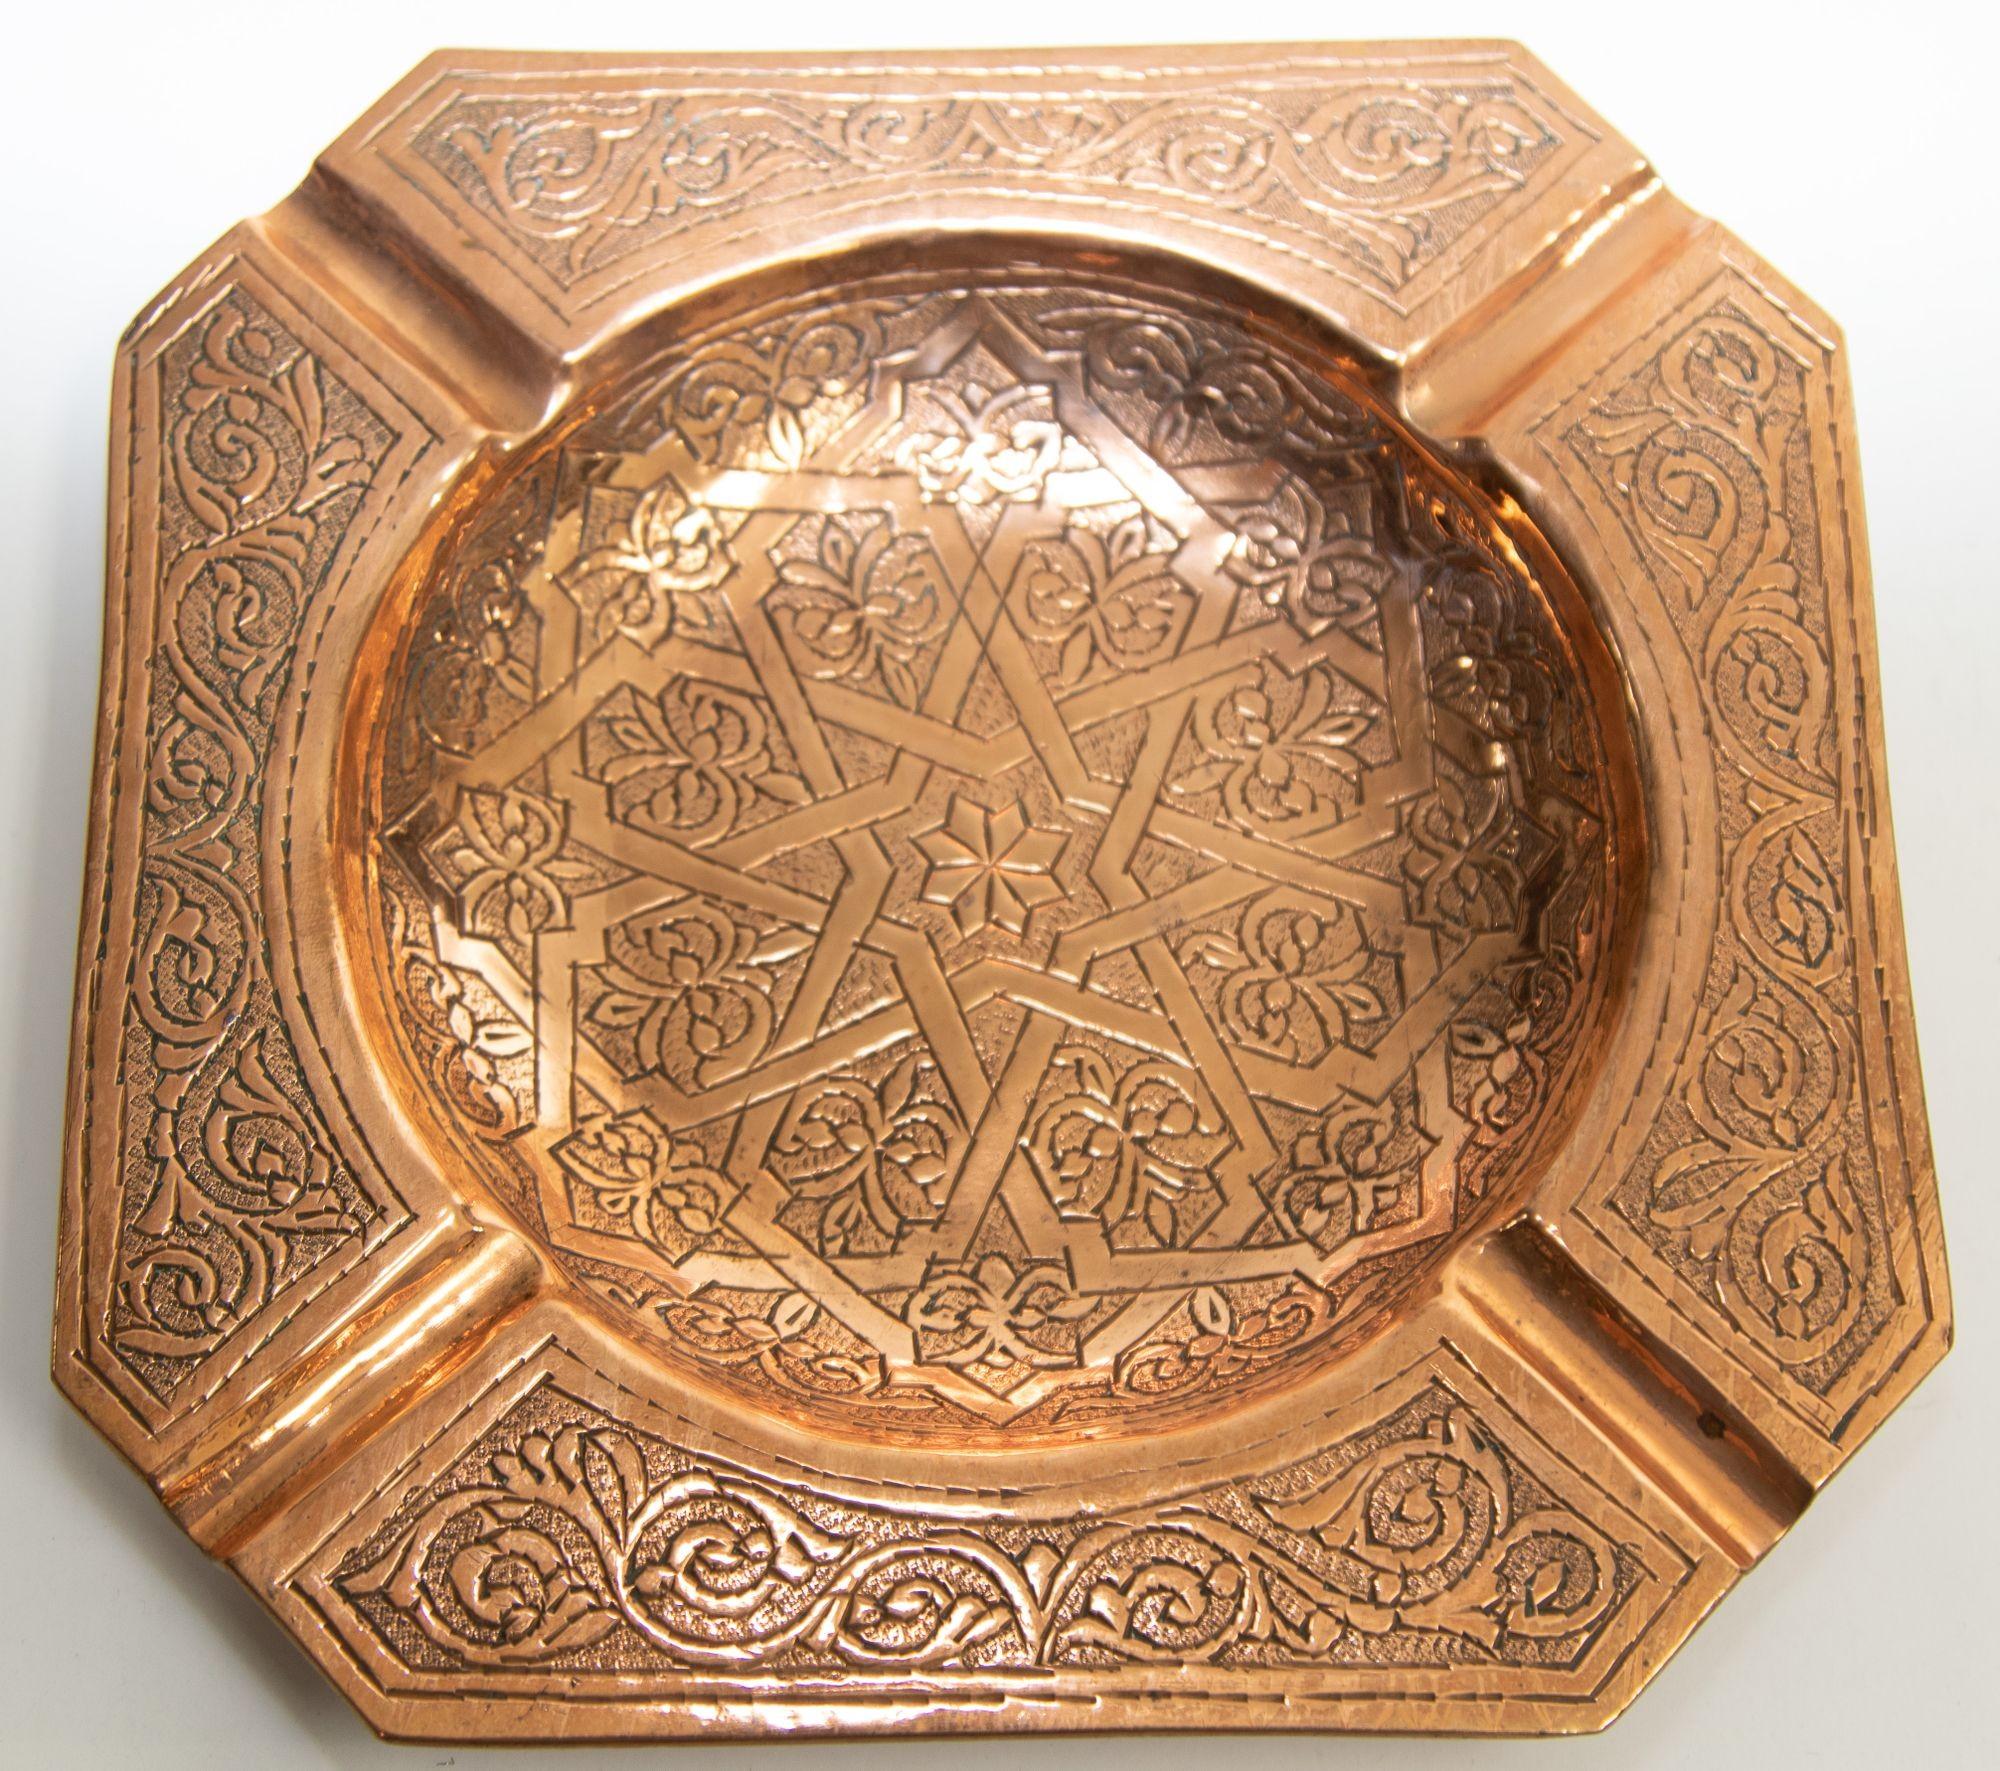 Large vintage Moroccan ashtray in octagonal metal hand-engraved with Moorish mosaic geometric designs.
Vintage large hammered copper mosaic ashtray, trinket dish, catchall, vide poche, brass metal Moorish tray, decorative dish.
This is a vintage